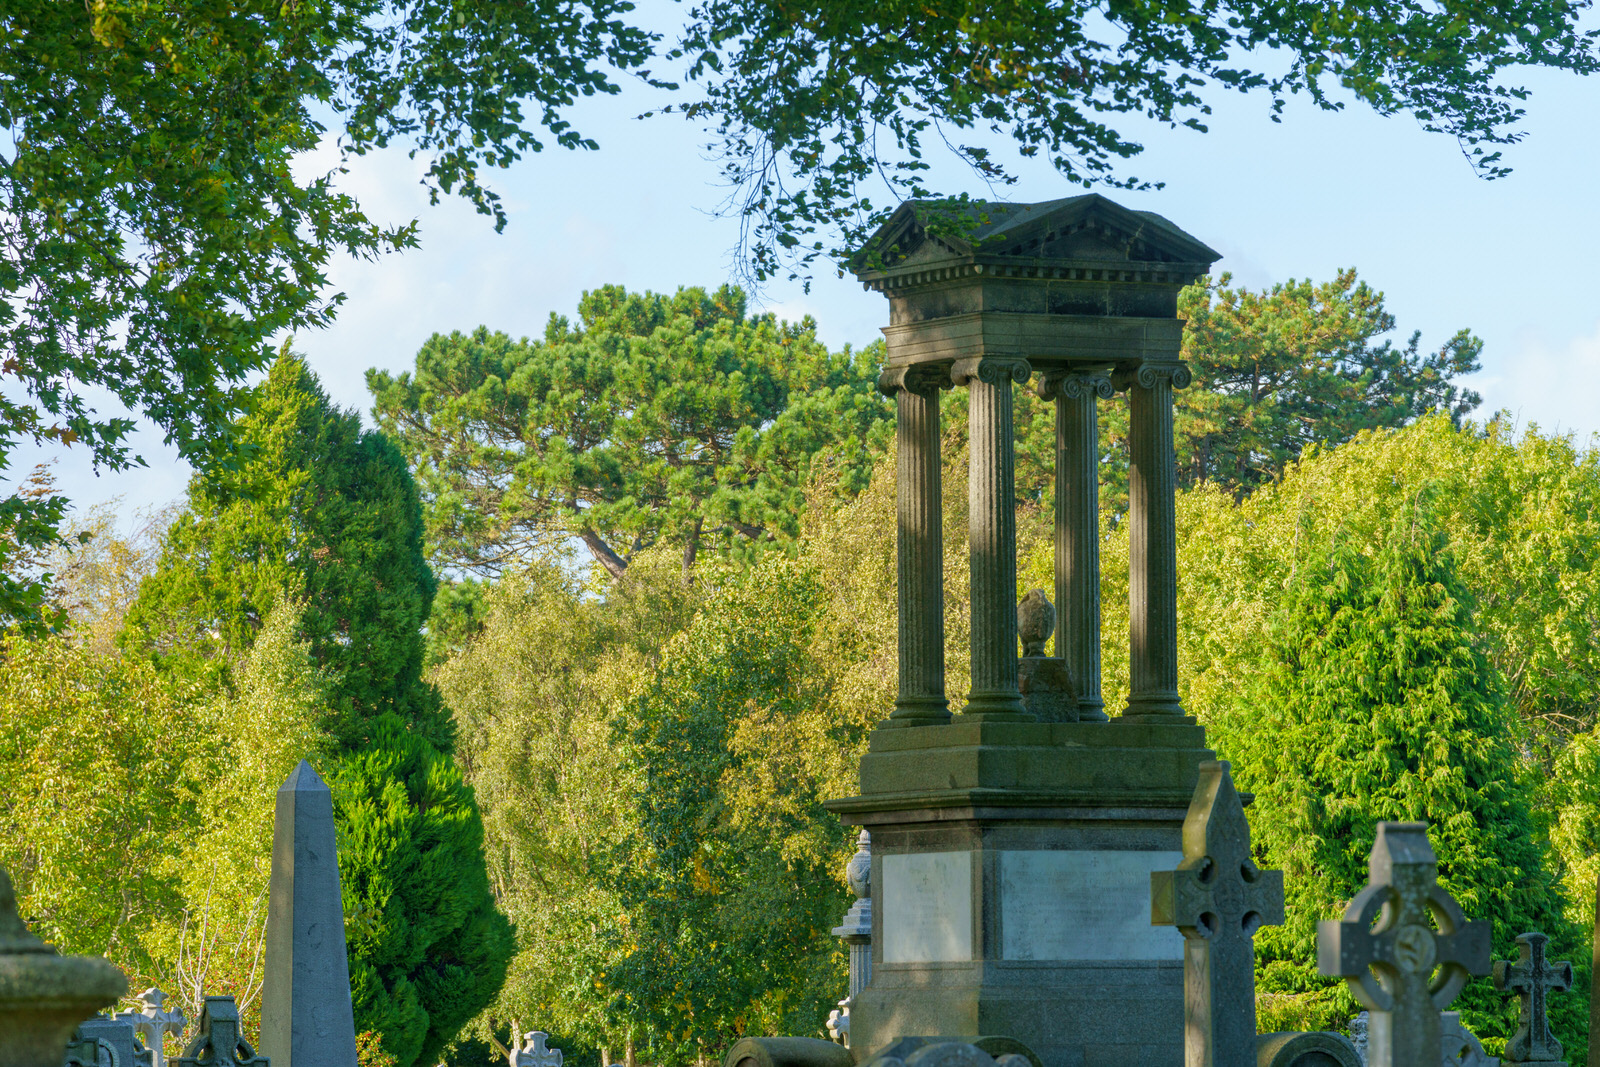 THE OLDER SECTION OF GLASNEVIN CEMETERY [I USED A SONY 70-200MM GM LENS] 017